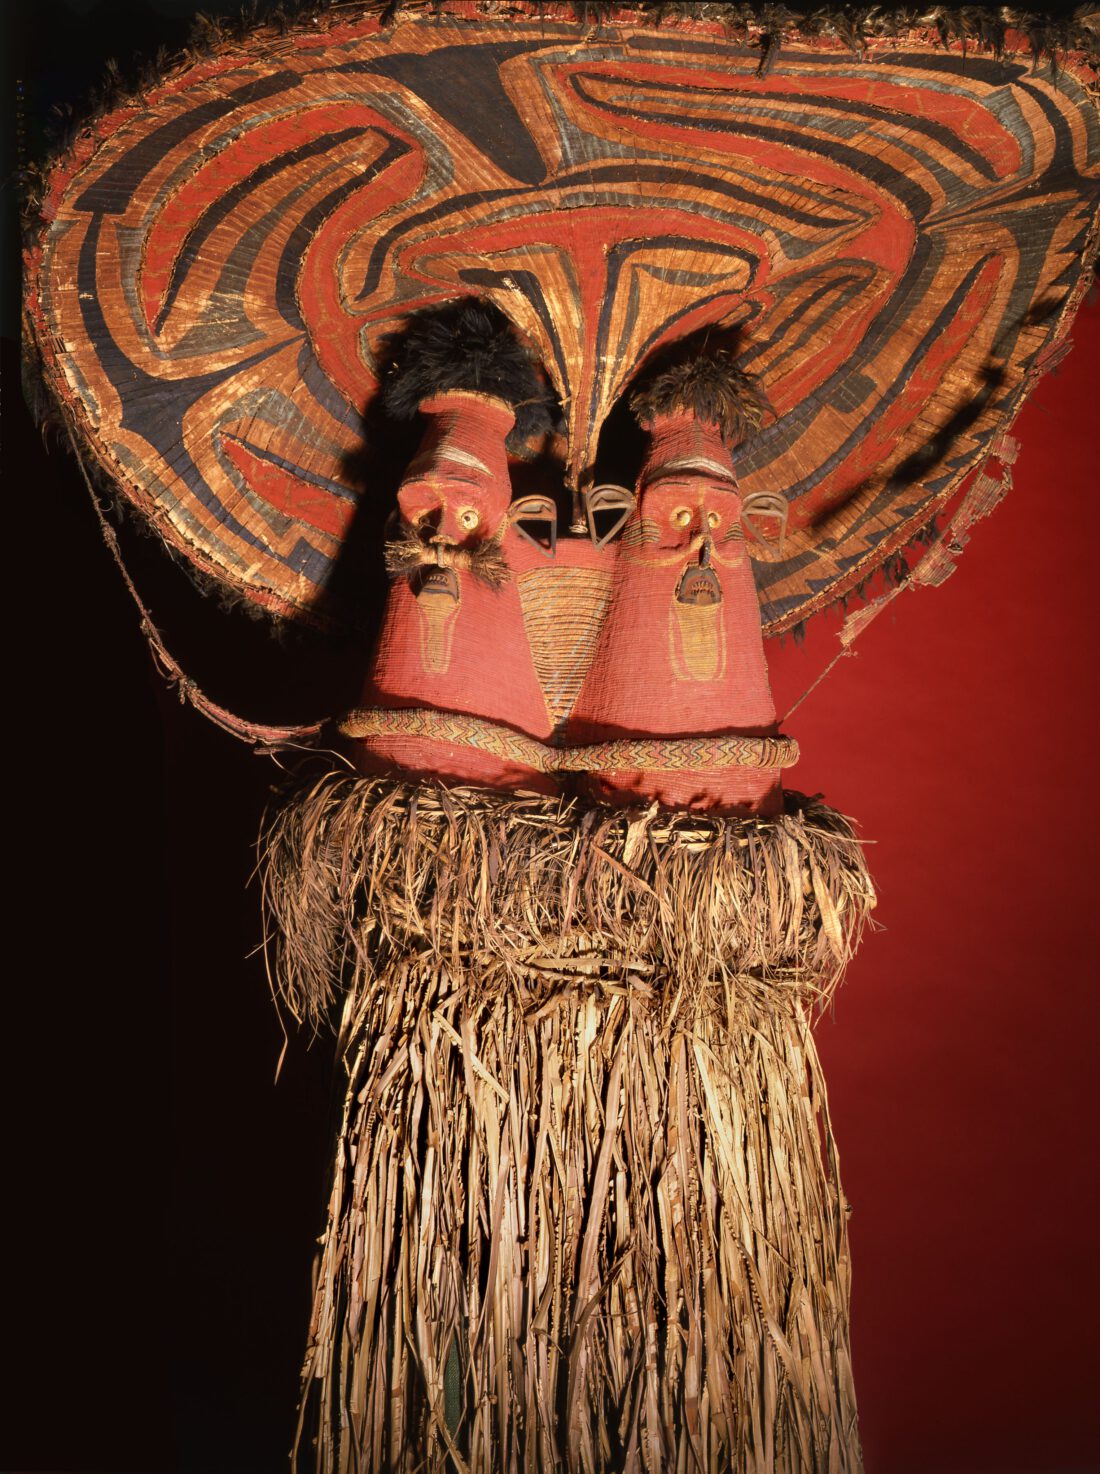 colourful mask with two faces made of bamboo, plant fibres and feathers